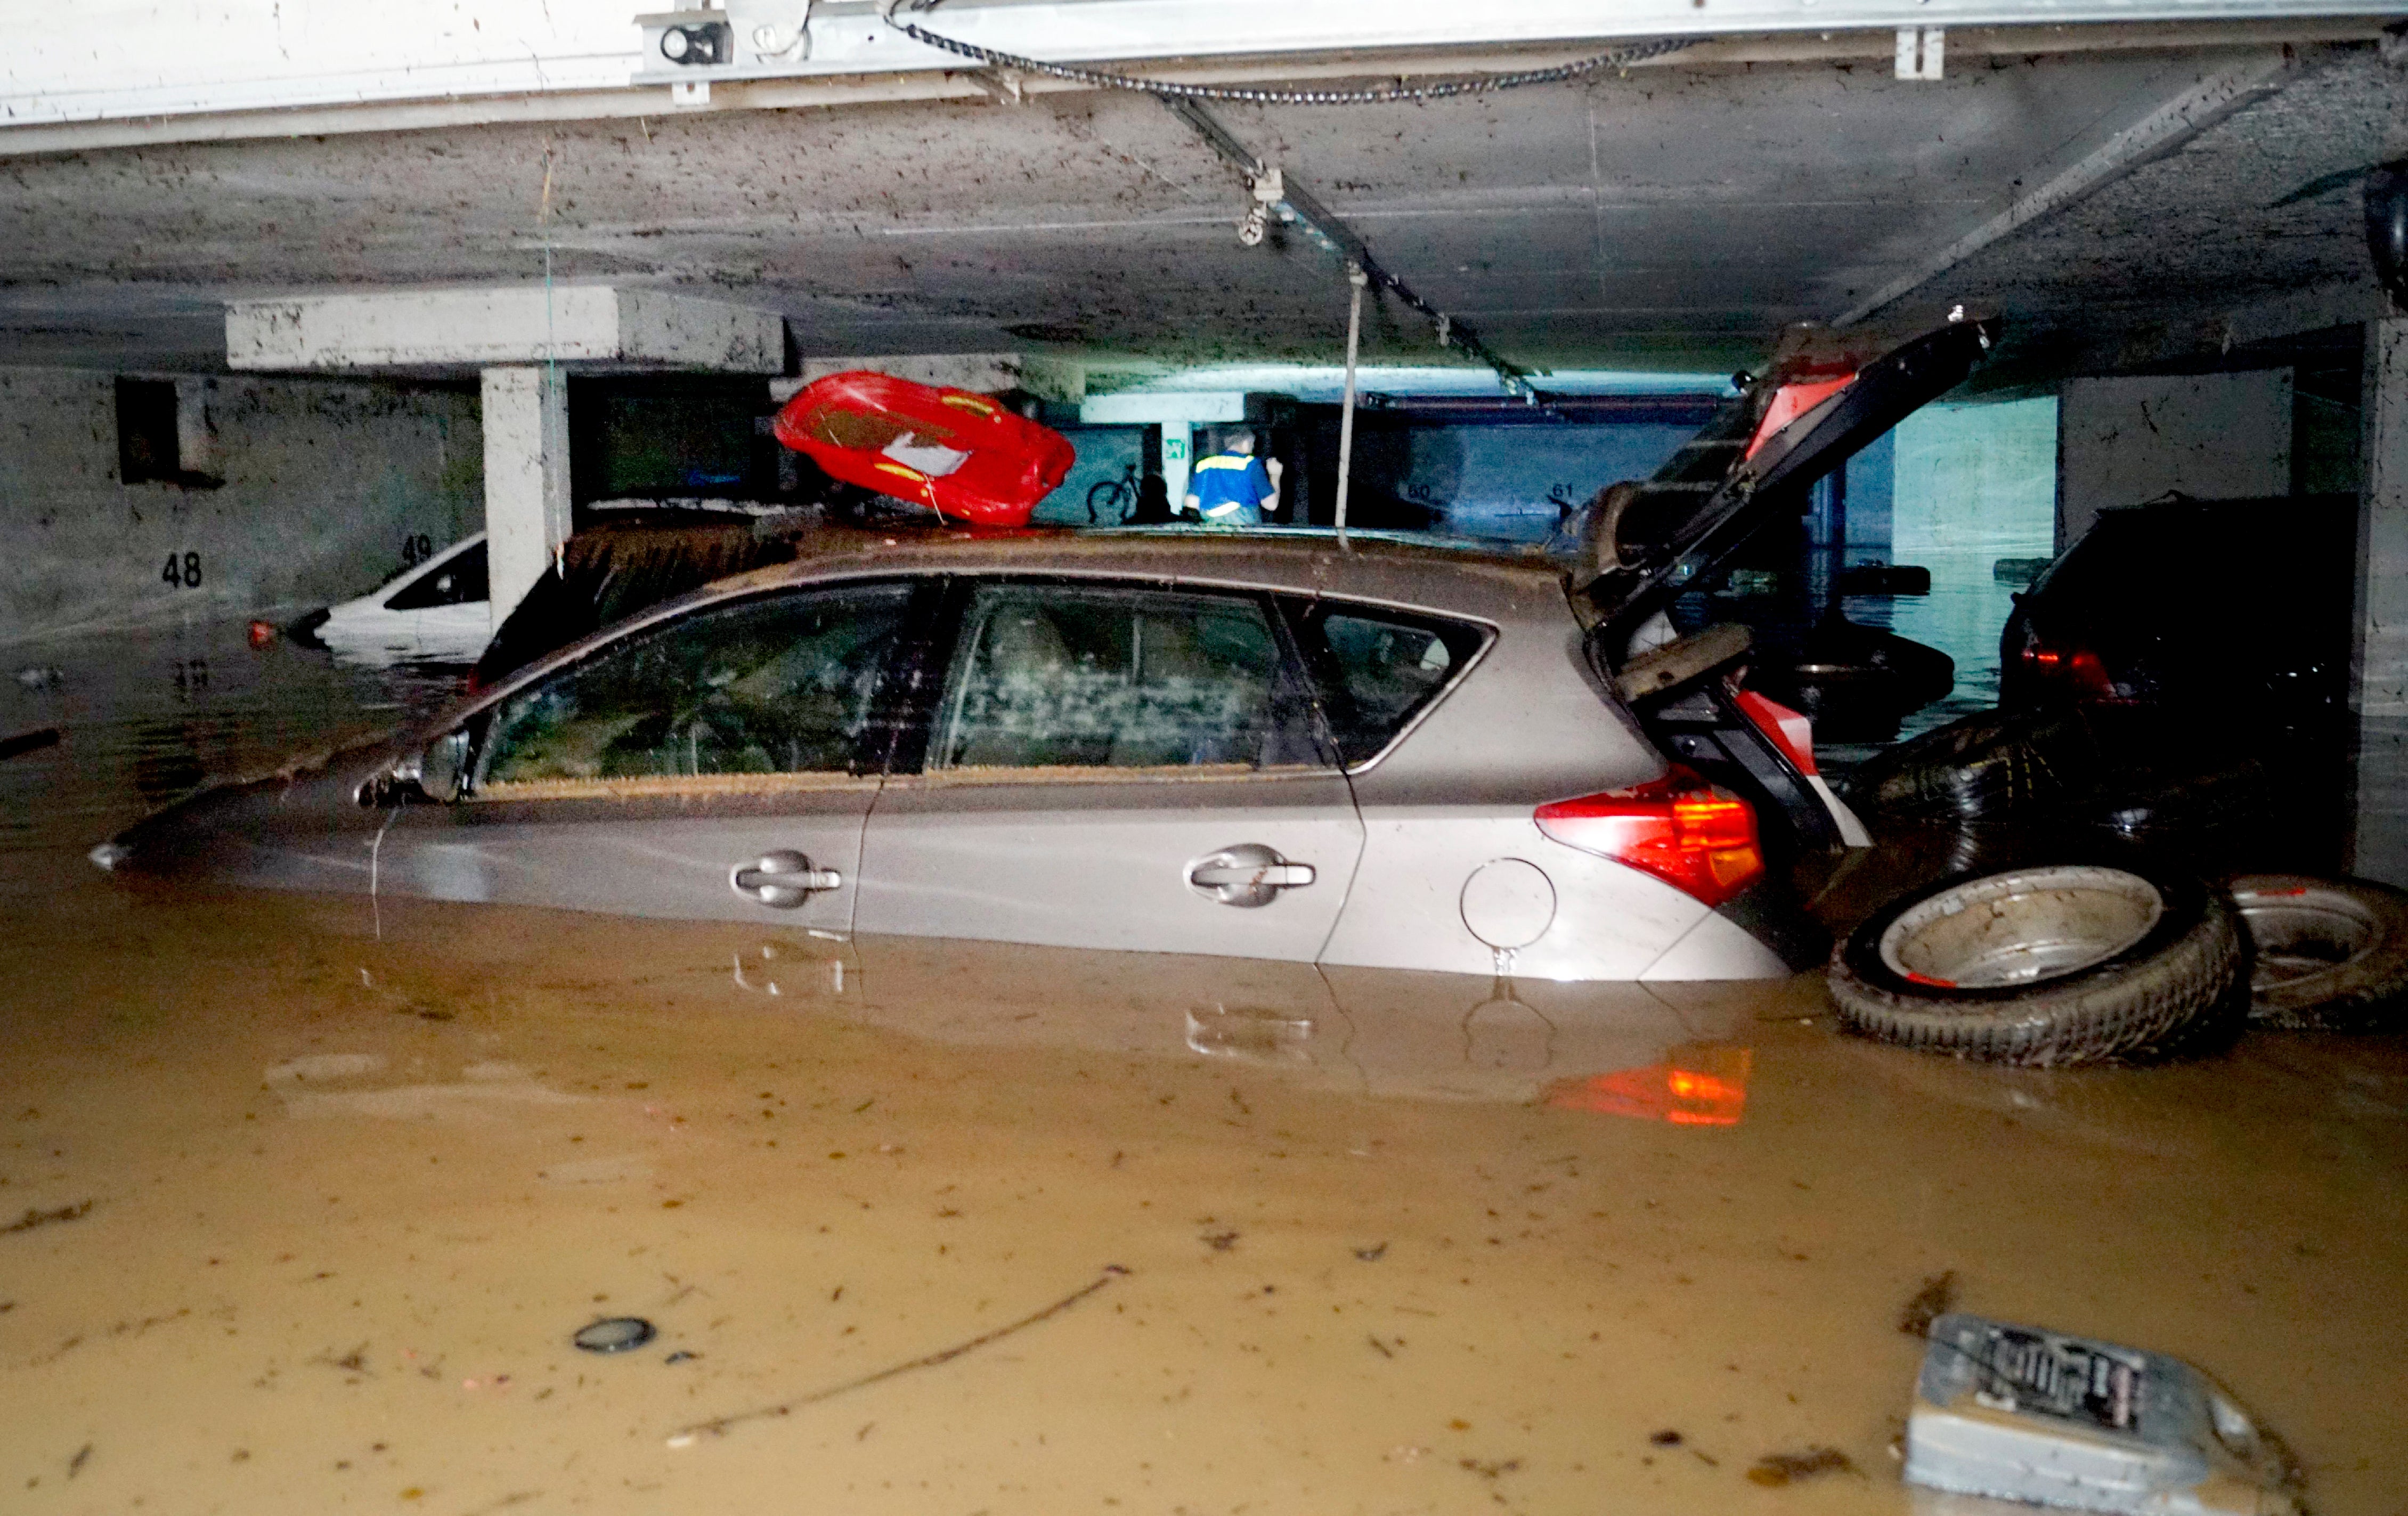 Vehicles are parked in a flooded underground car park on June 12, 2018 in Hochdorf, Germany.  (Photo: Alexander W’lfl, AP)